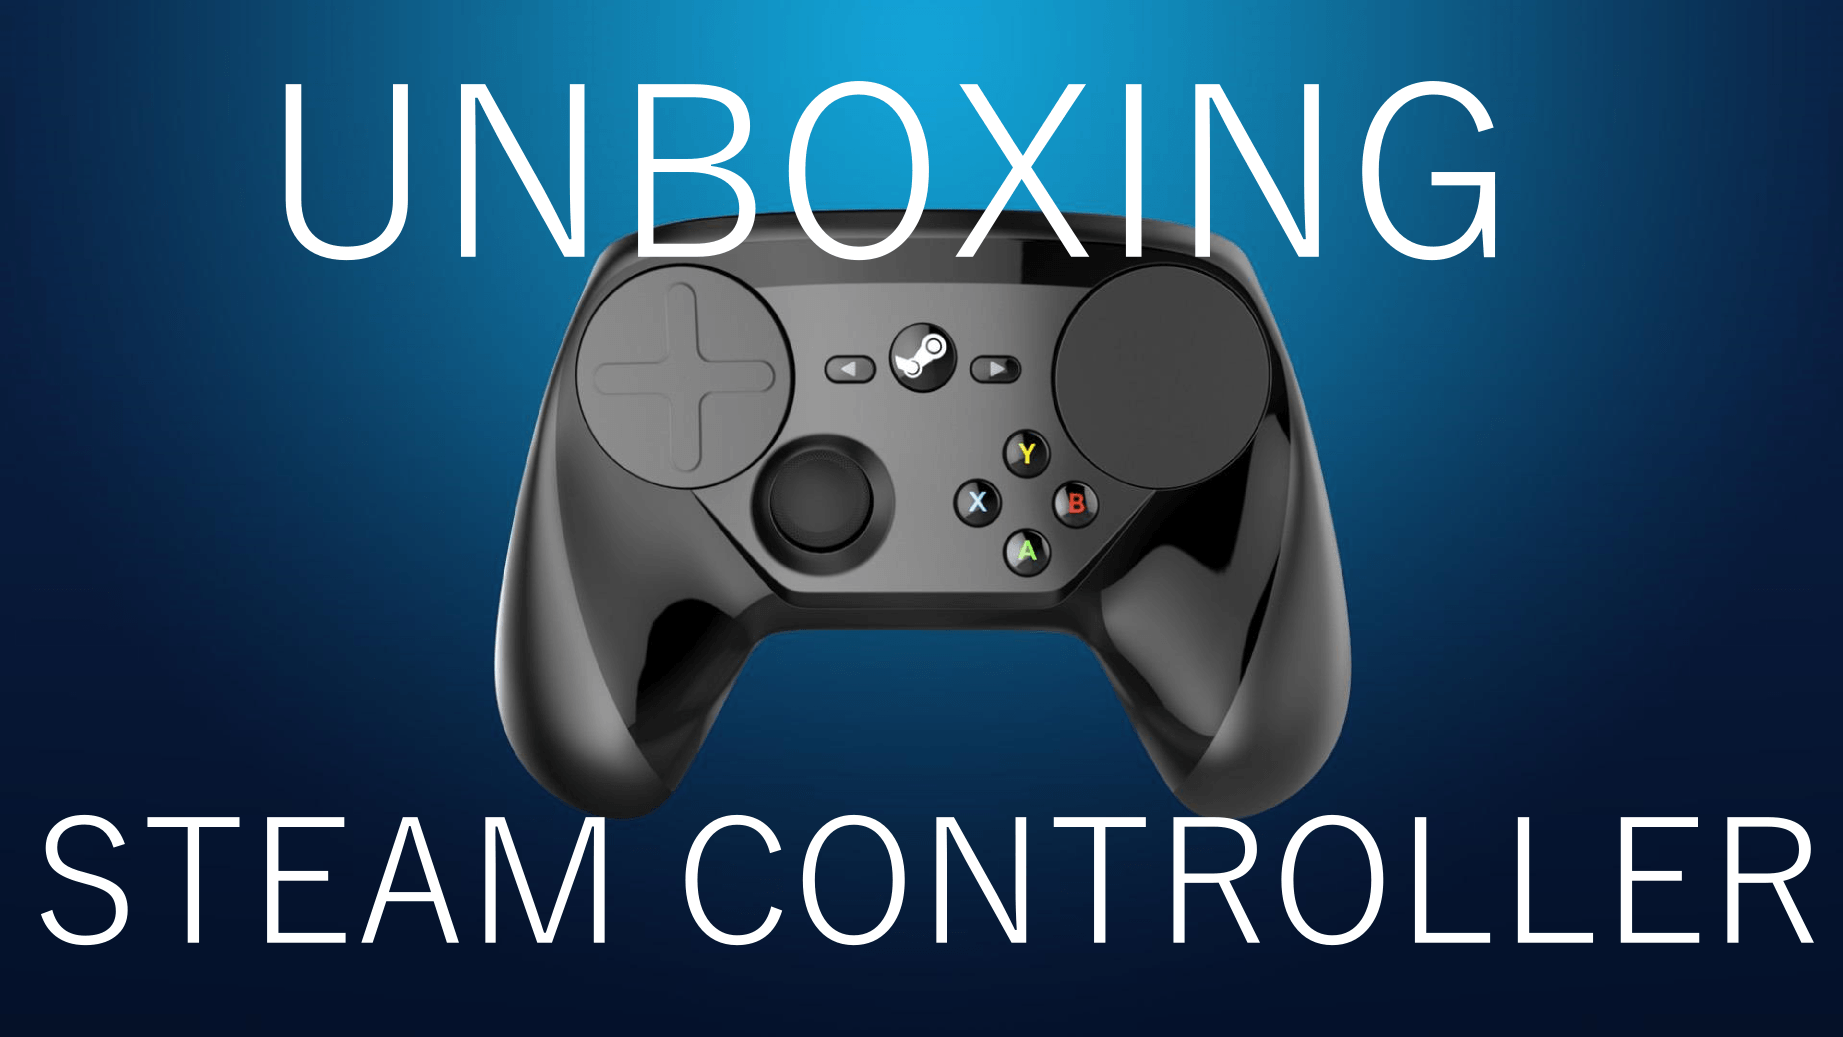 Only if steam controls фото 44